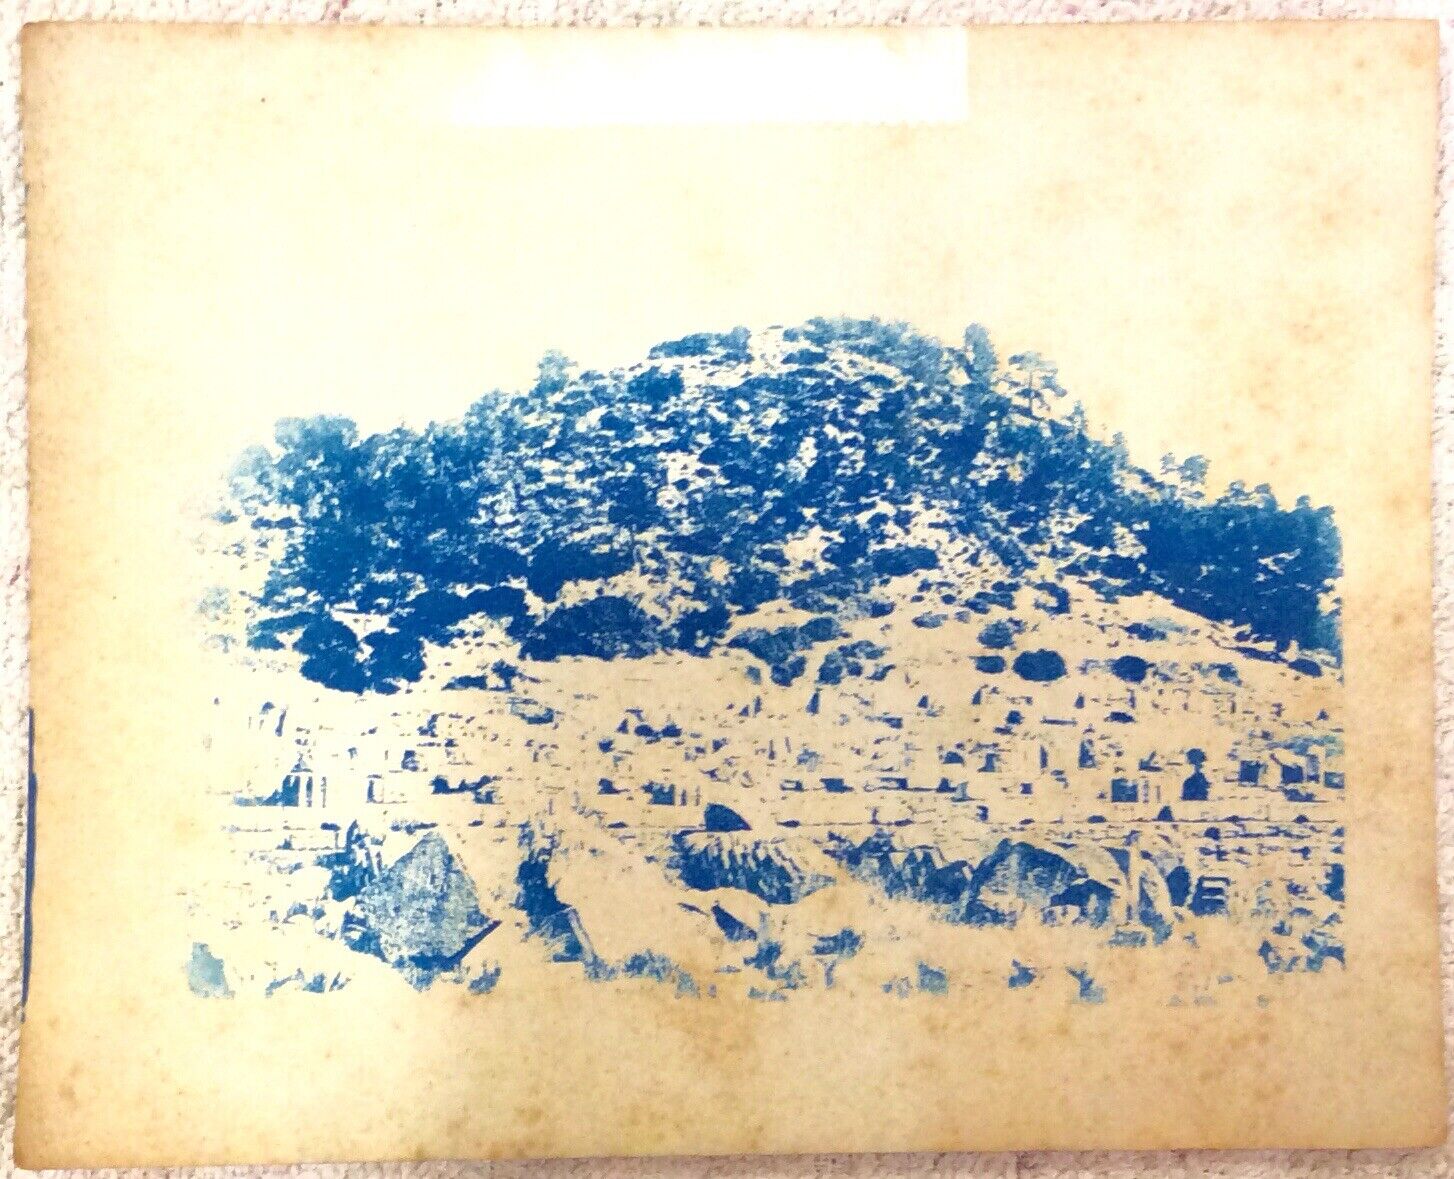 RARE 1890s 1900s RUINS OF RACE TRACK AT OLYMPIA GREECE GREEK CYANOTYPE PHOTO